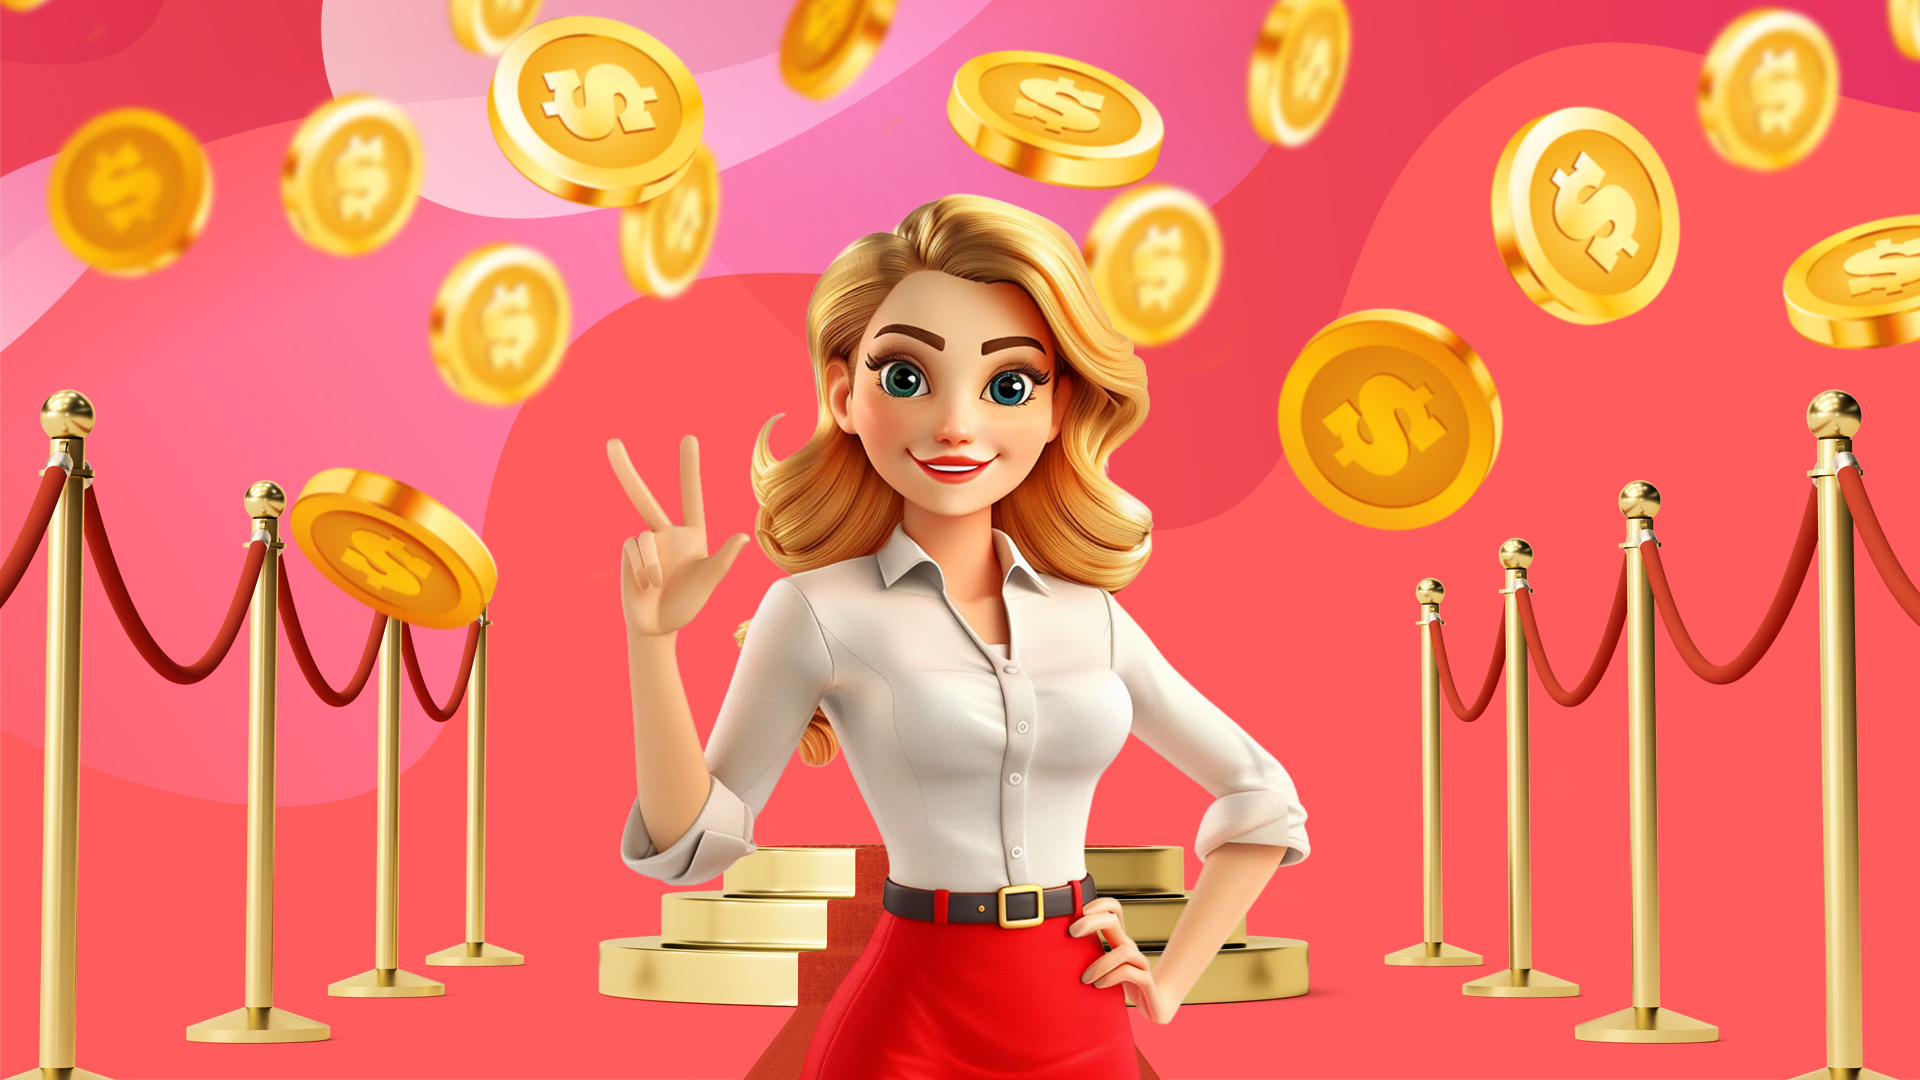 On a red background there’s a blonde lady waving on a red carpet in between velvet ropes and gold coins are poised over her head.